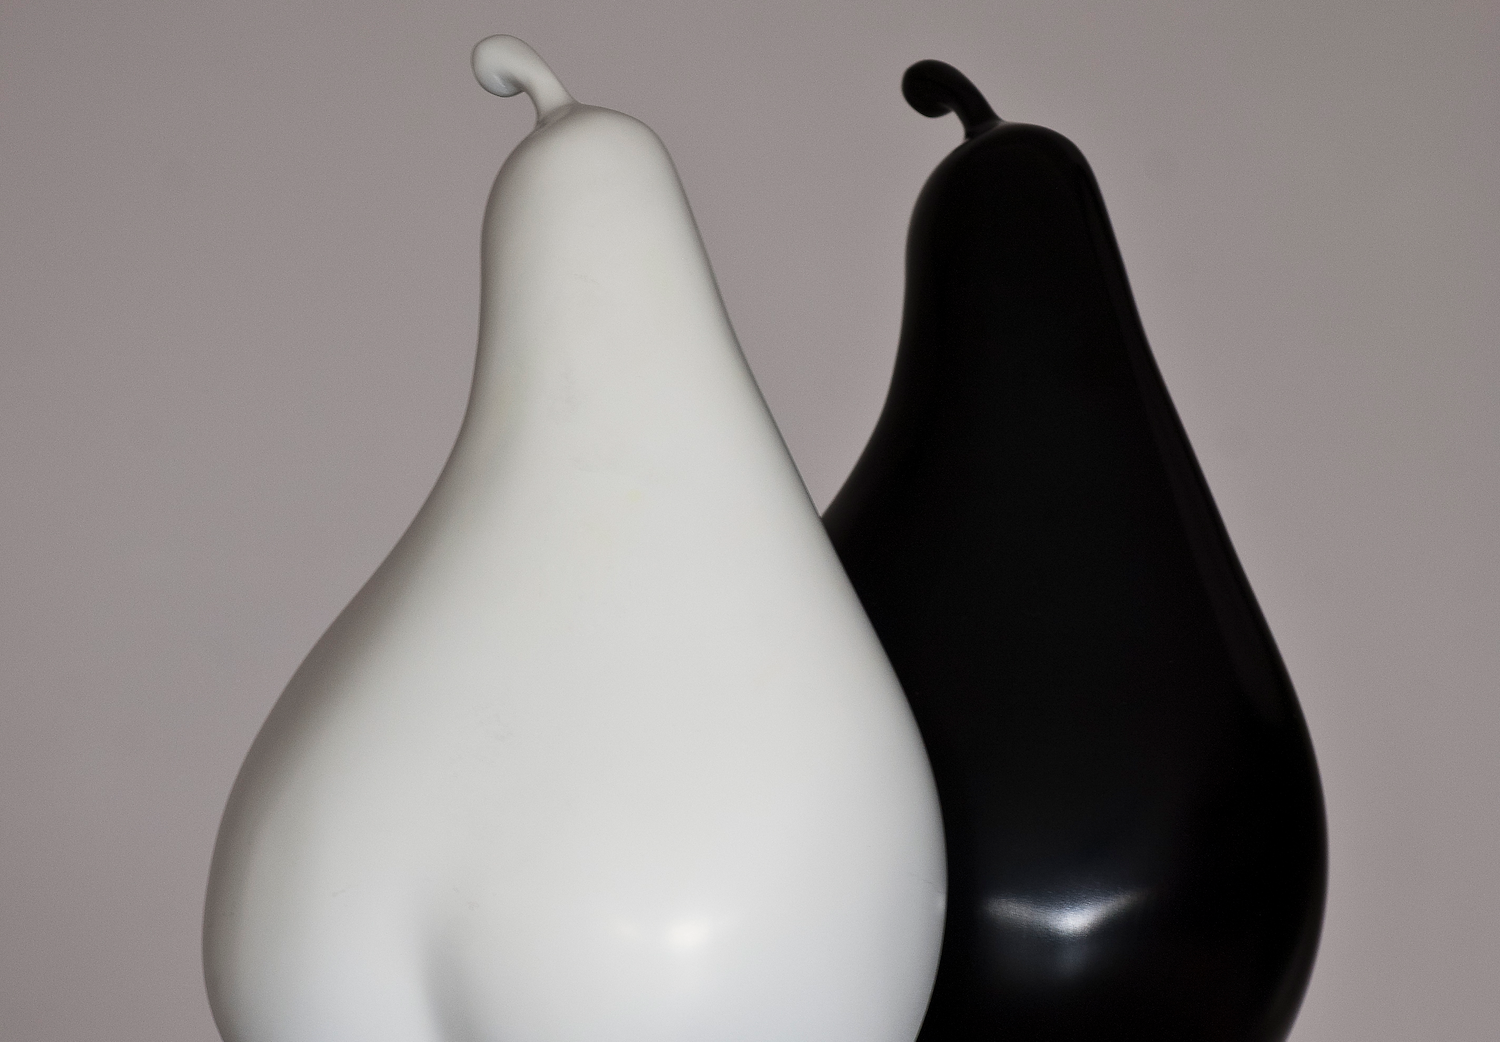 Two pear sculptures—one in black and one in white